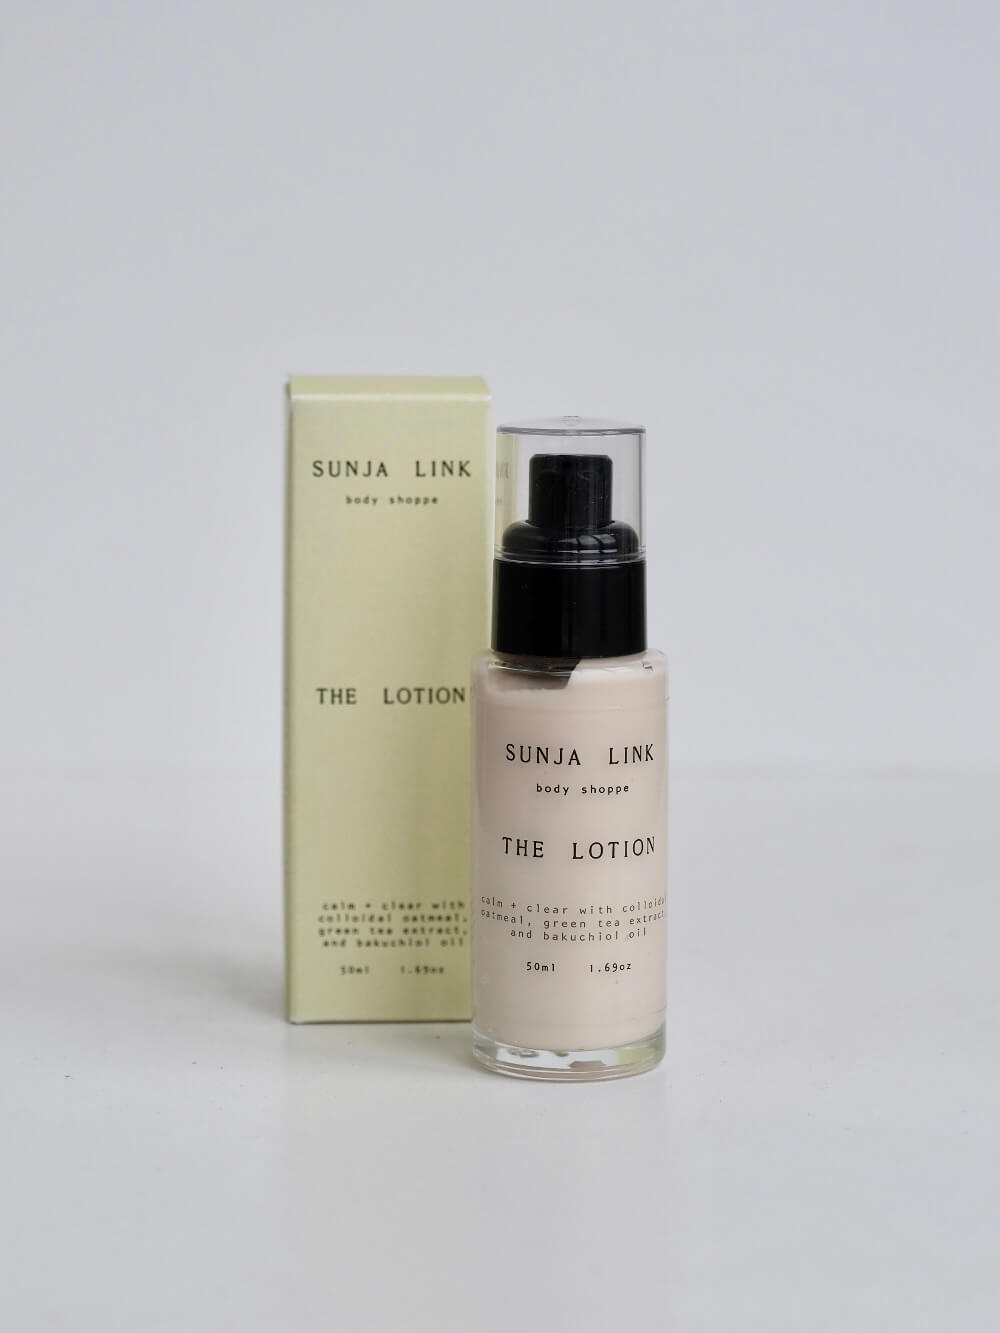 The Lotion by Sunja Link